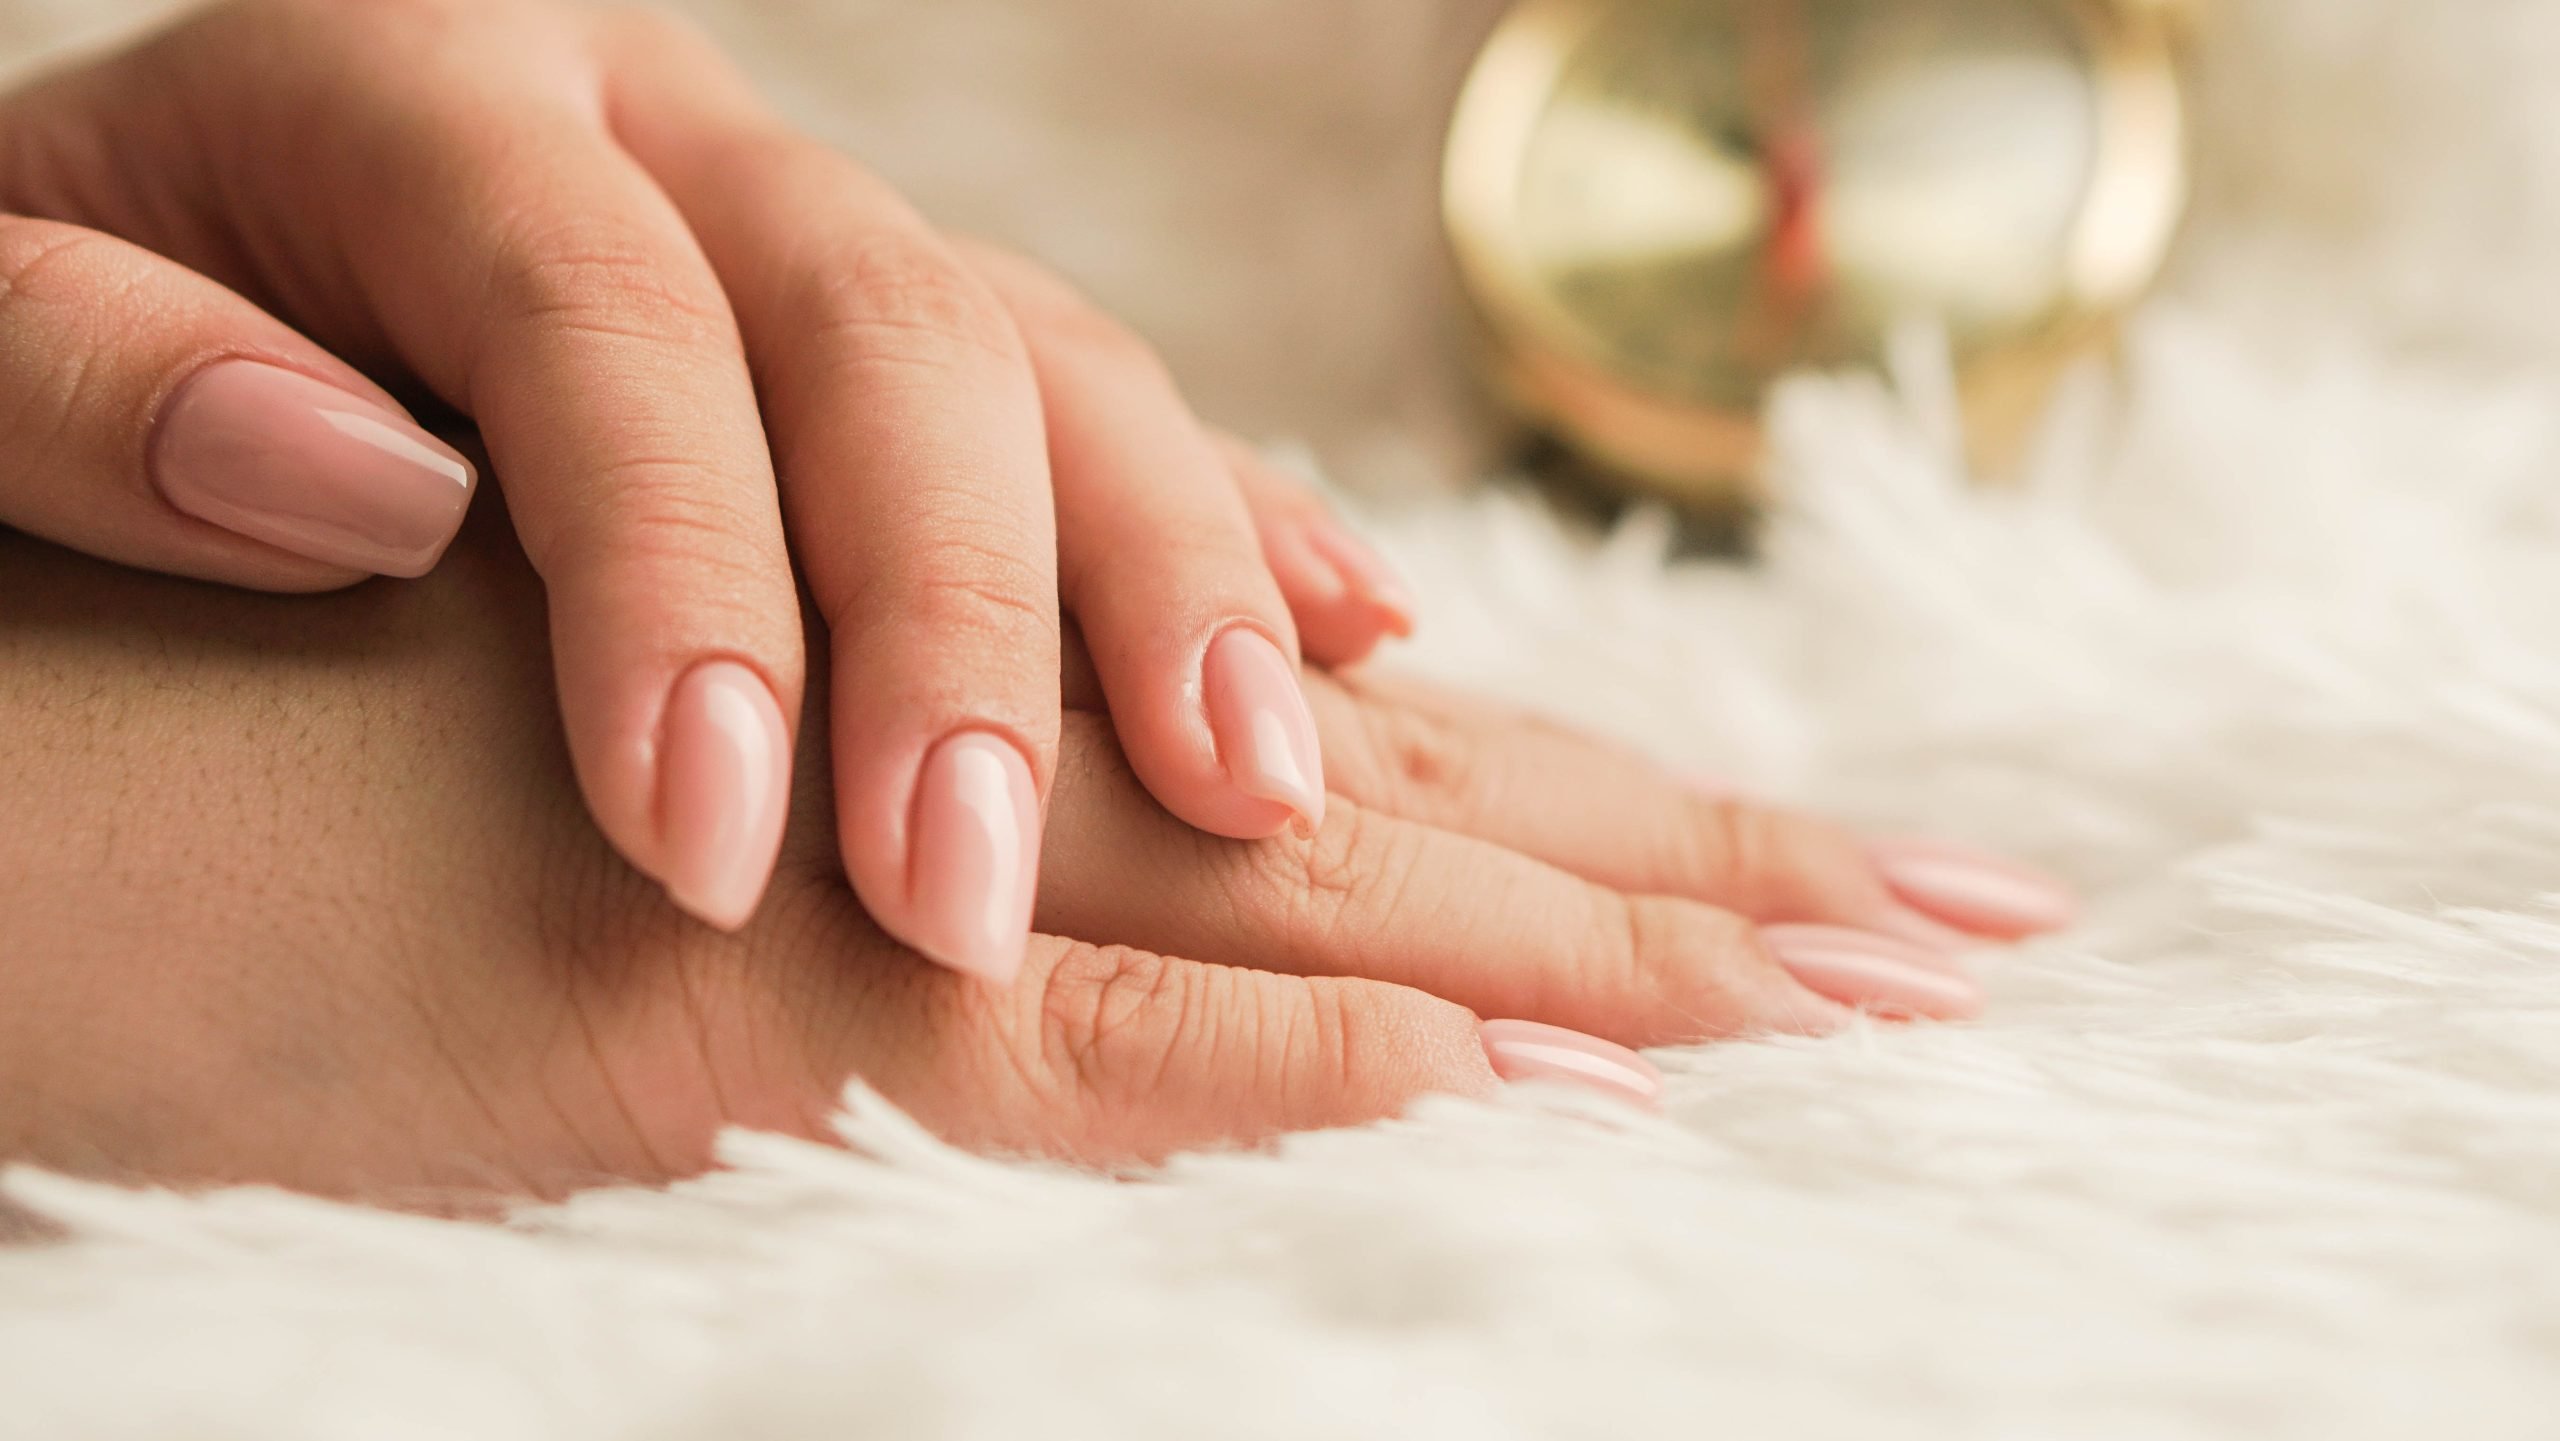 When Is The Massage Performed During A Manicure?